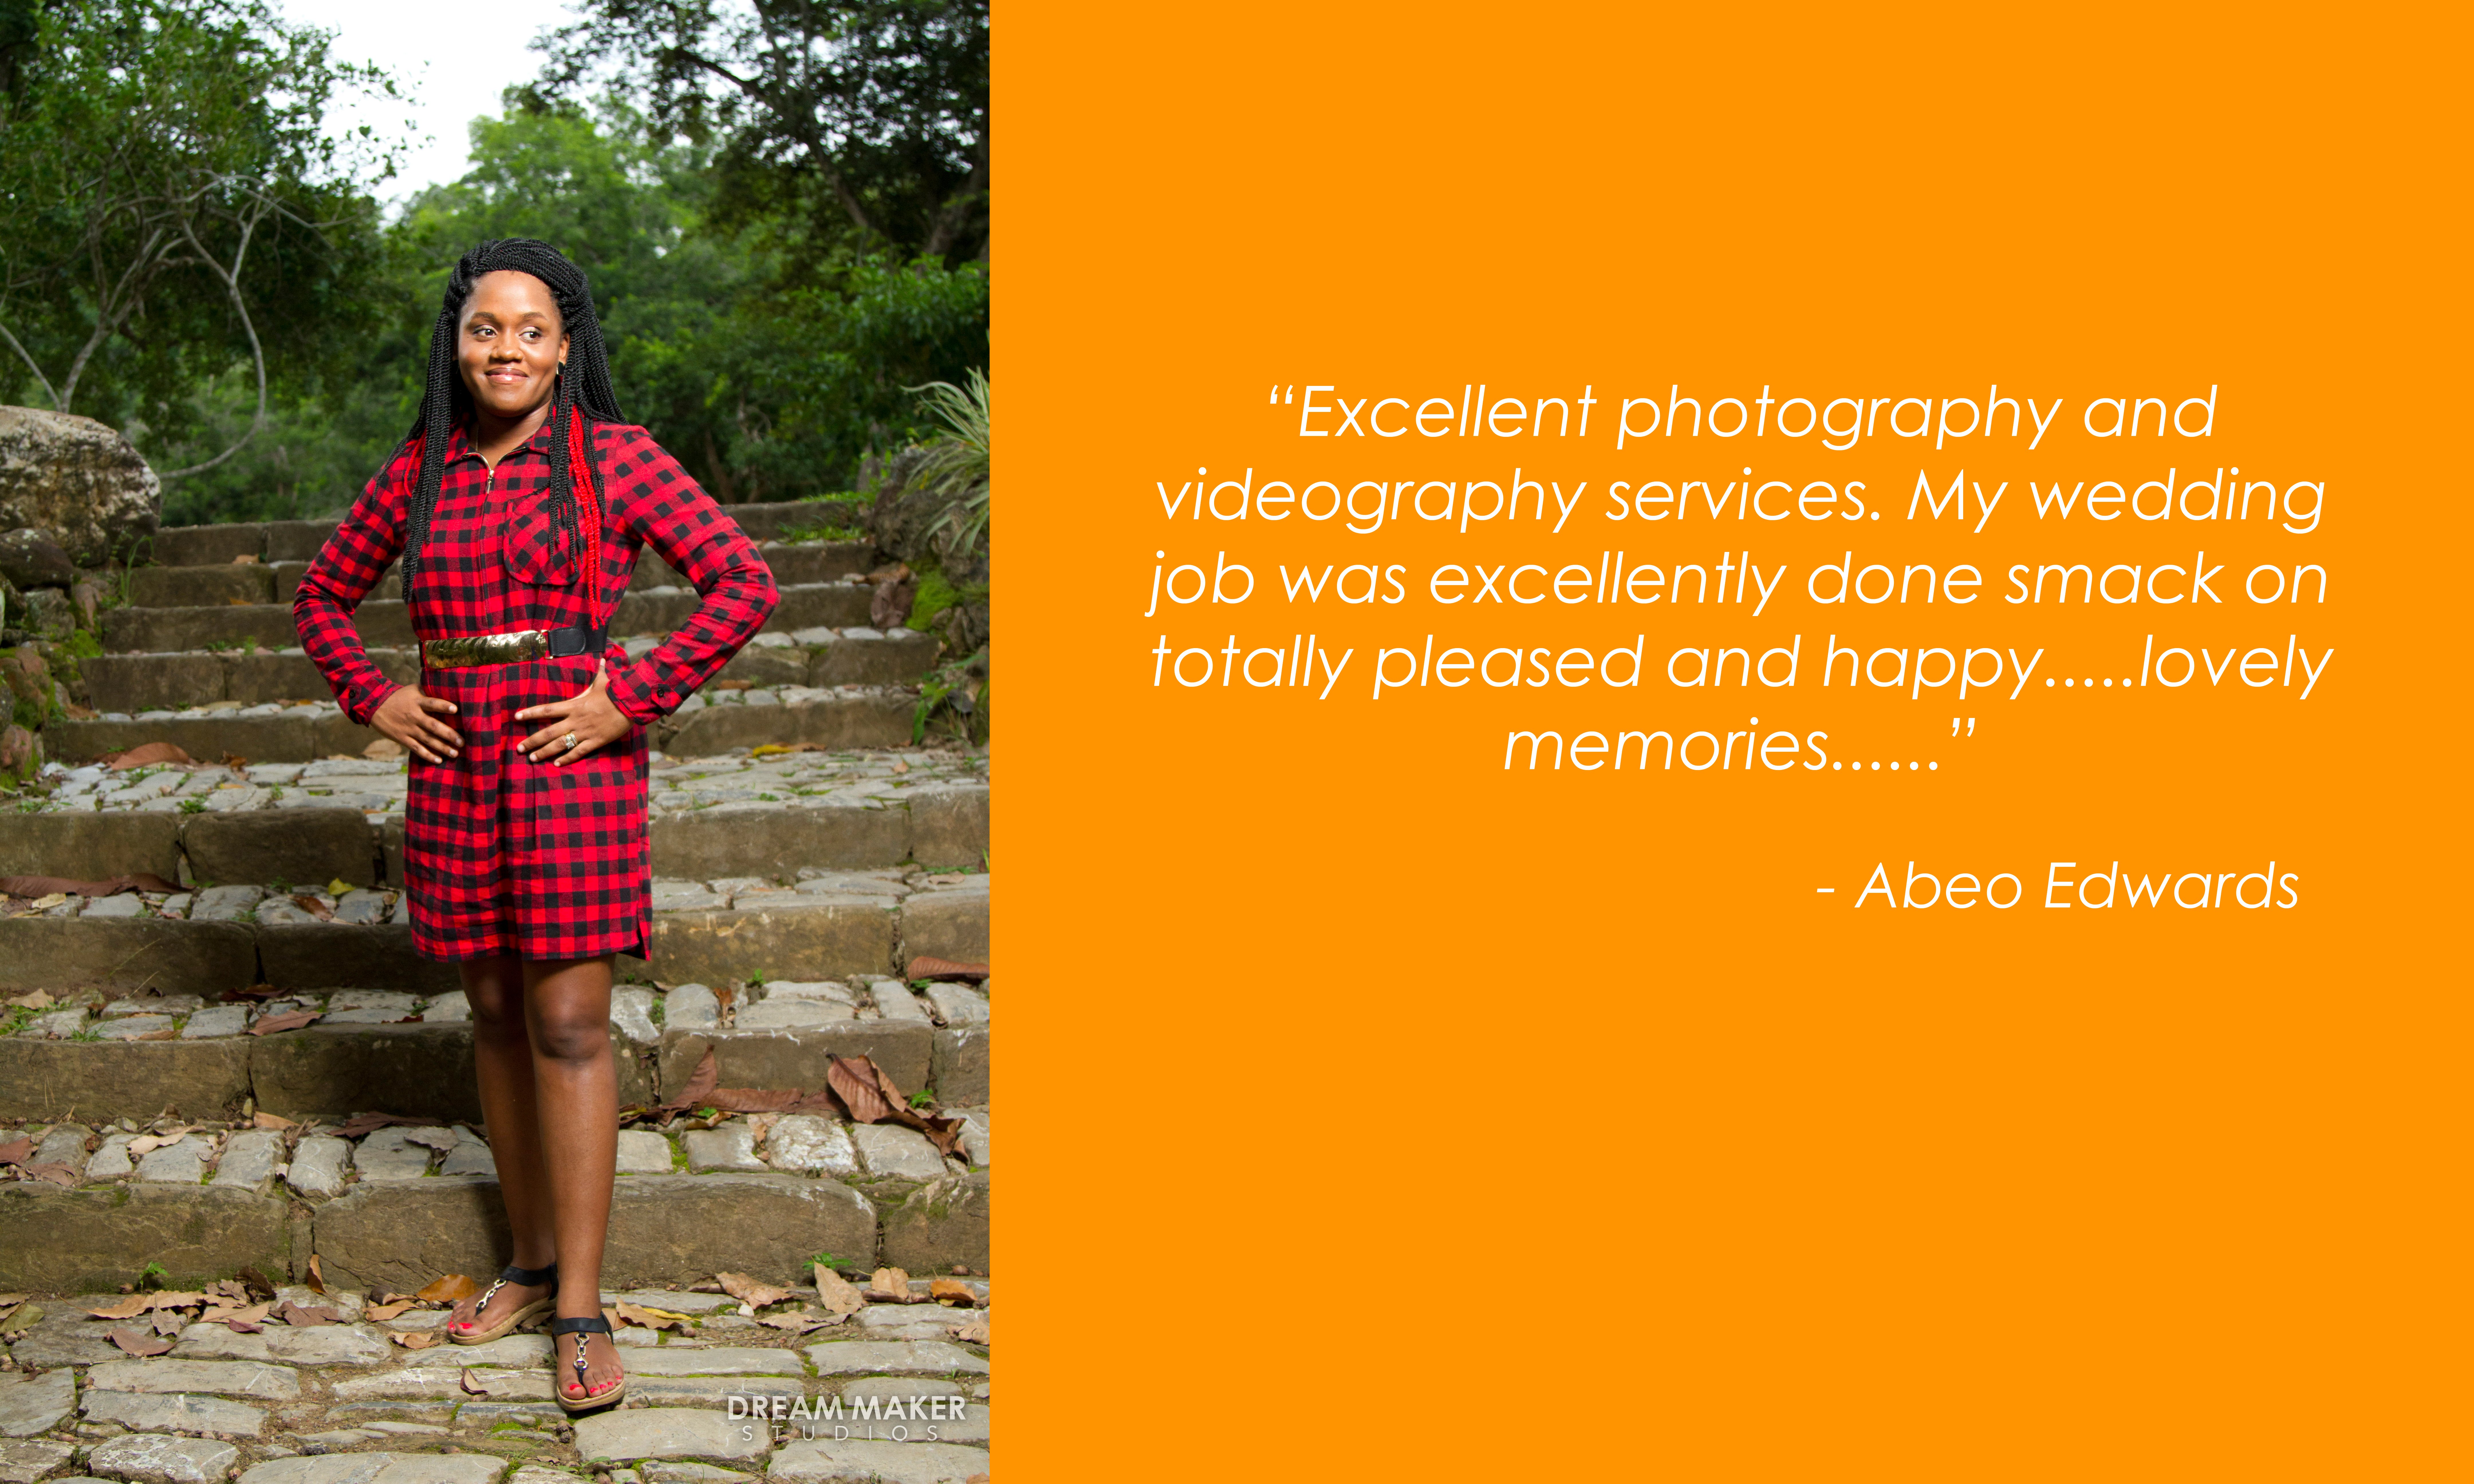 Testimonial - Excellent photography and videography services. My wedding job was excellently done smack on totally pleased and happy... lovely memories... - Abeo Edwards